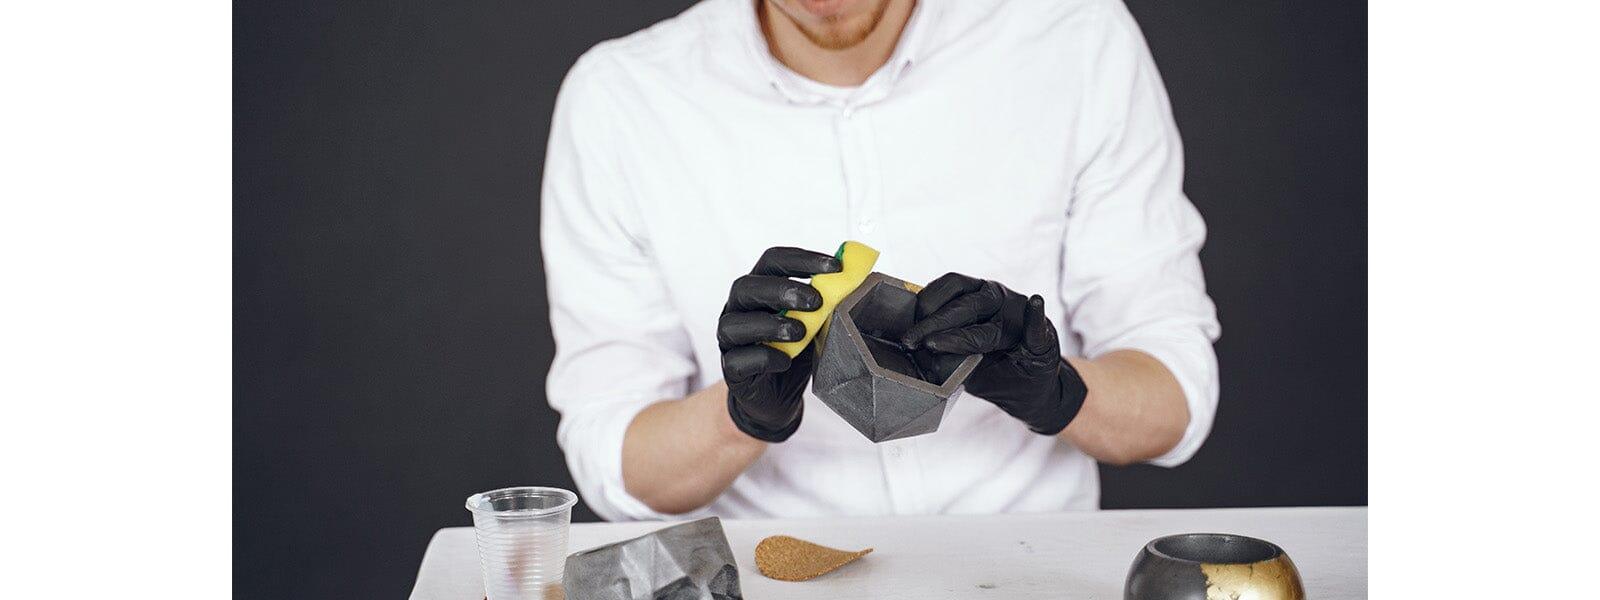 The Best Disposable Gloves for Handling Paint and Lacquer Thinner